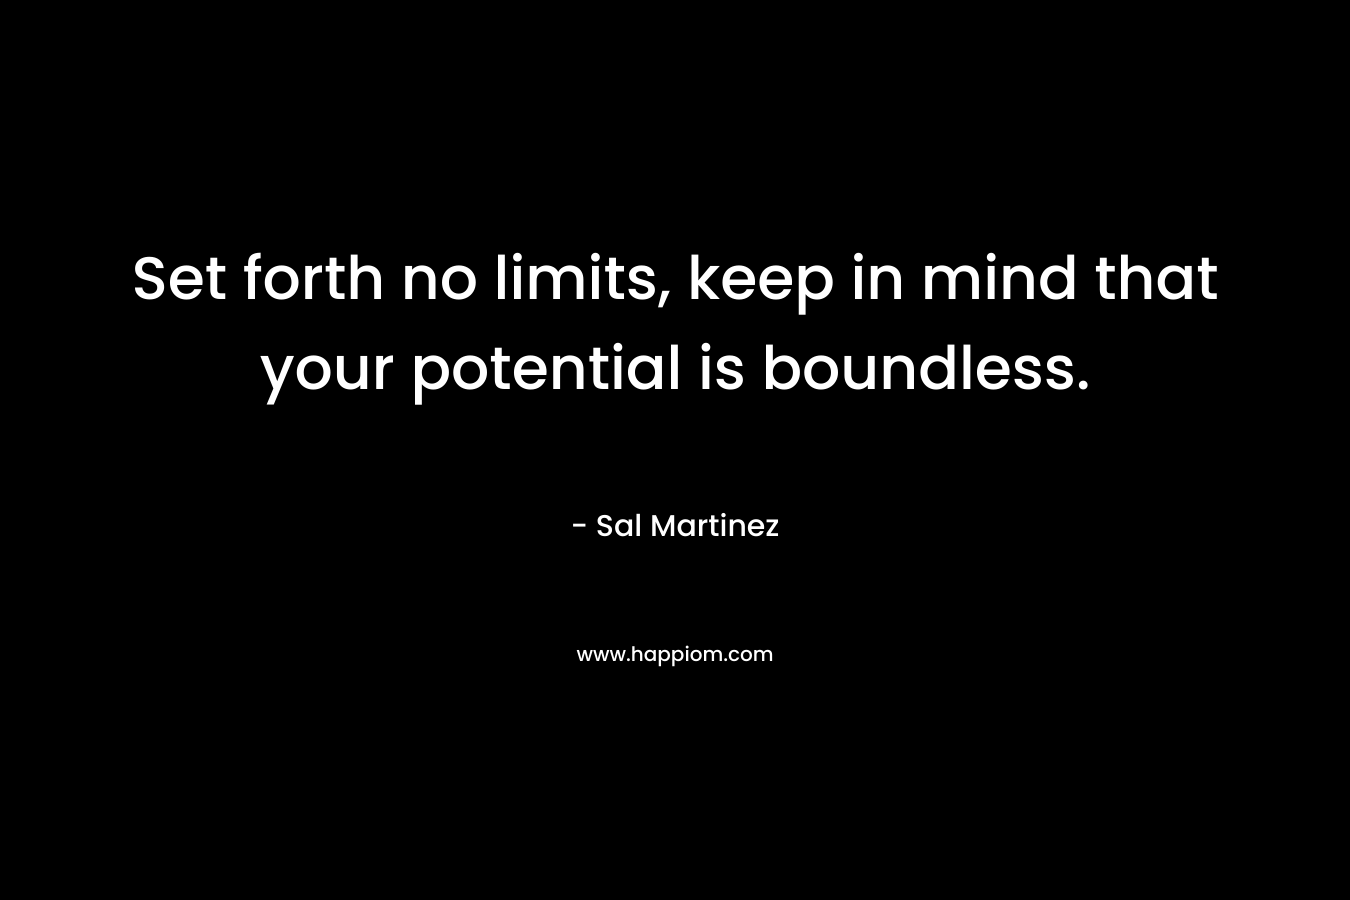 Set forth no limits, keep in mind that your potential is boundless.